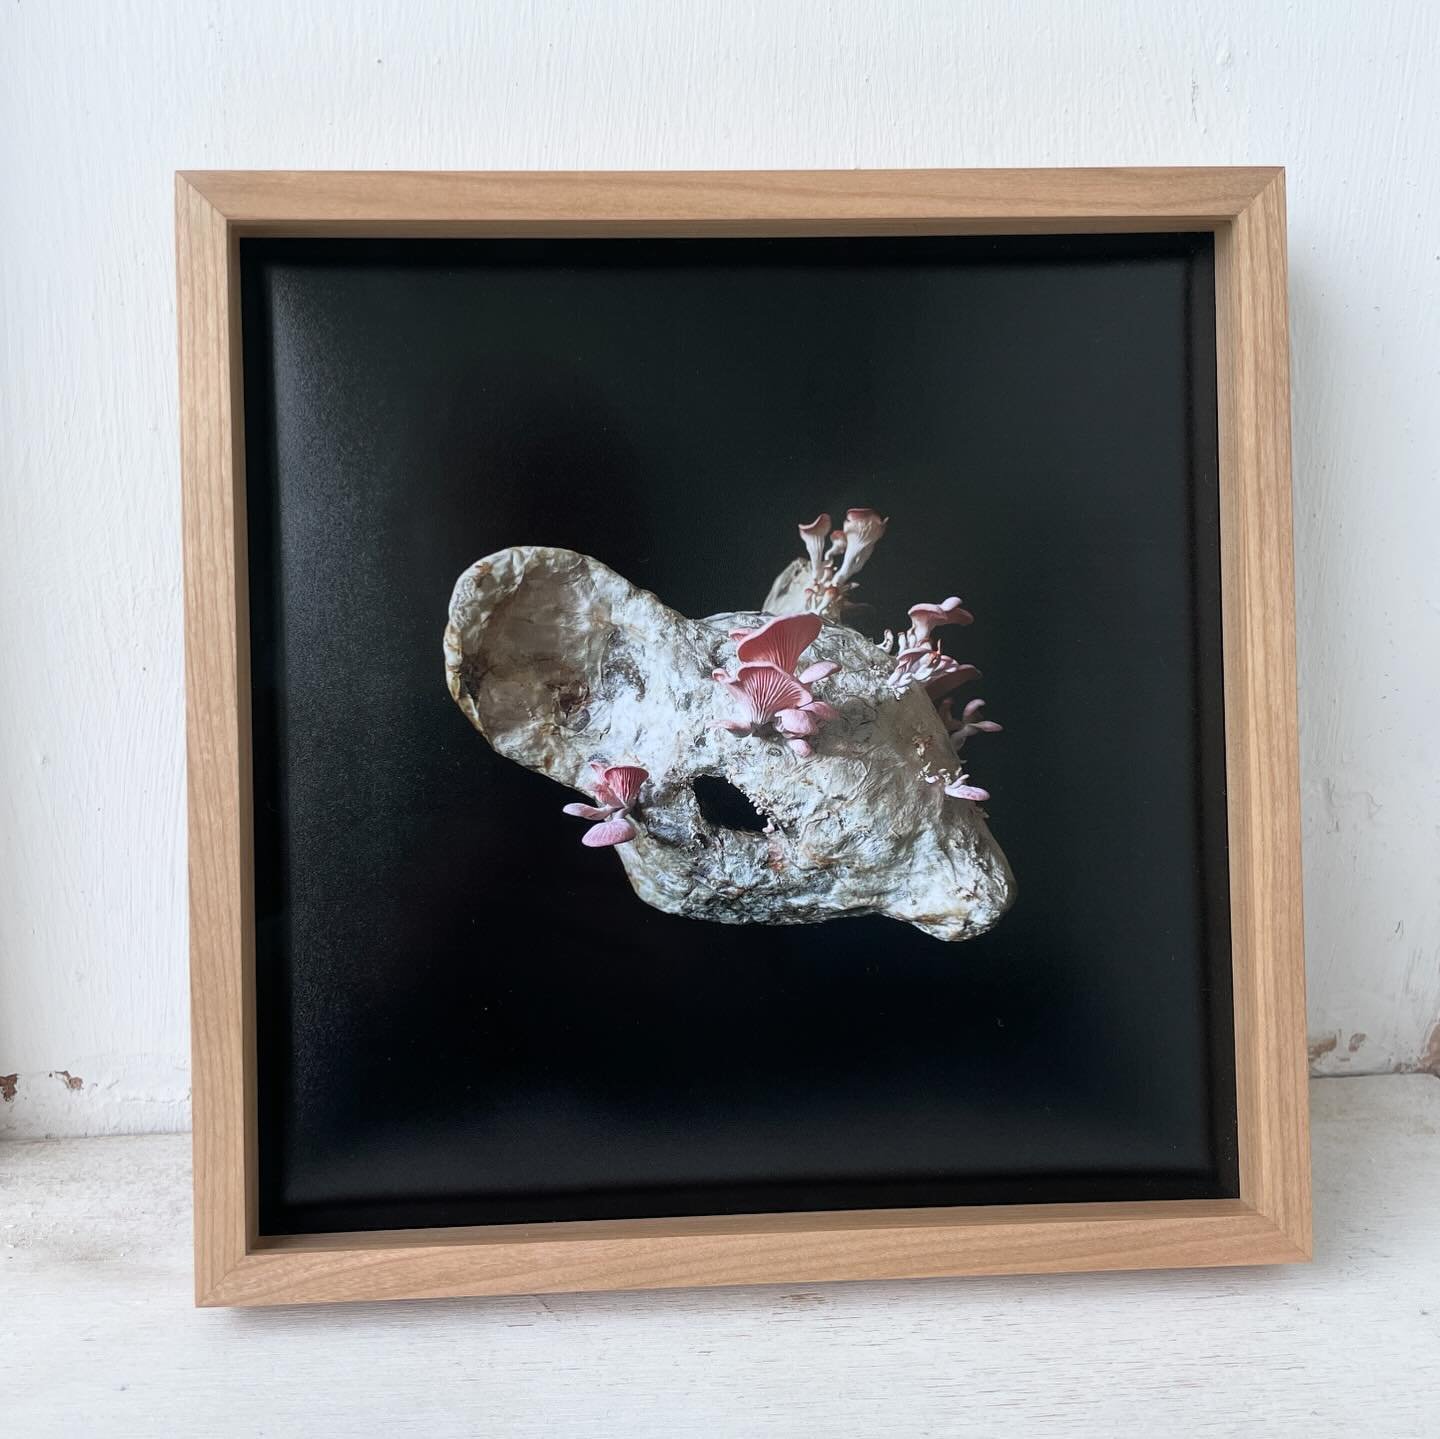 R O Y A L 
A C A D E M Y // Dropped this piece off for the final round of judging for the @royalacademyarts Summer Exhibition - fingers crossed it makes the cut!

Beautiful framing in a pinky-hued cherry wood by @cornerstoreframes.

#summerexhibition